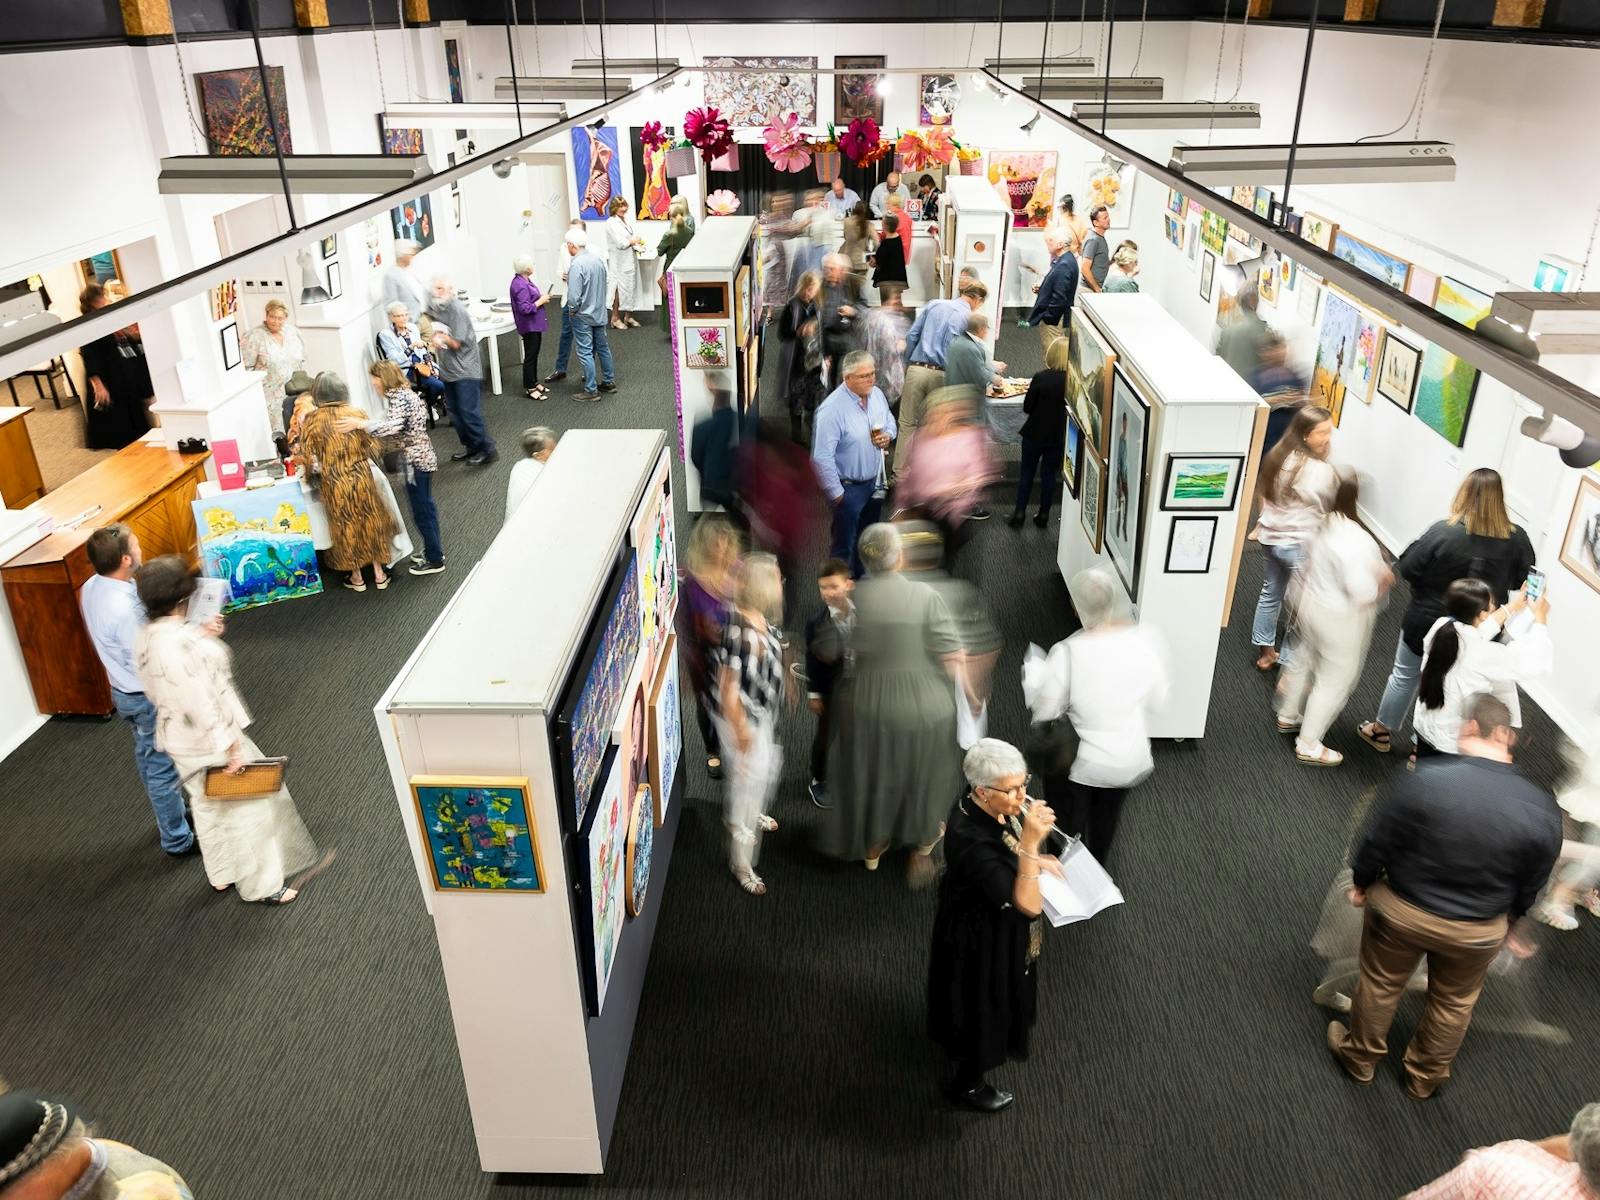 One of the display areas inside the gallery from above with people viewing the display